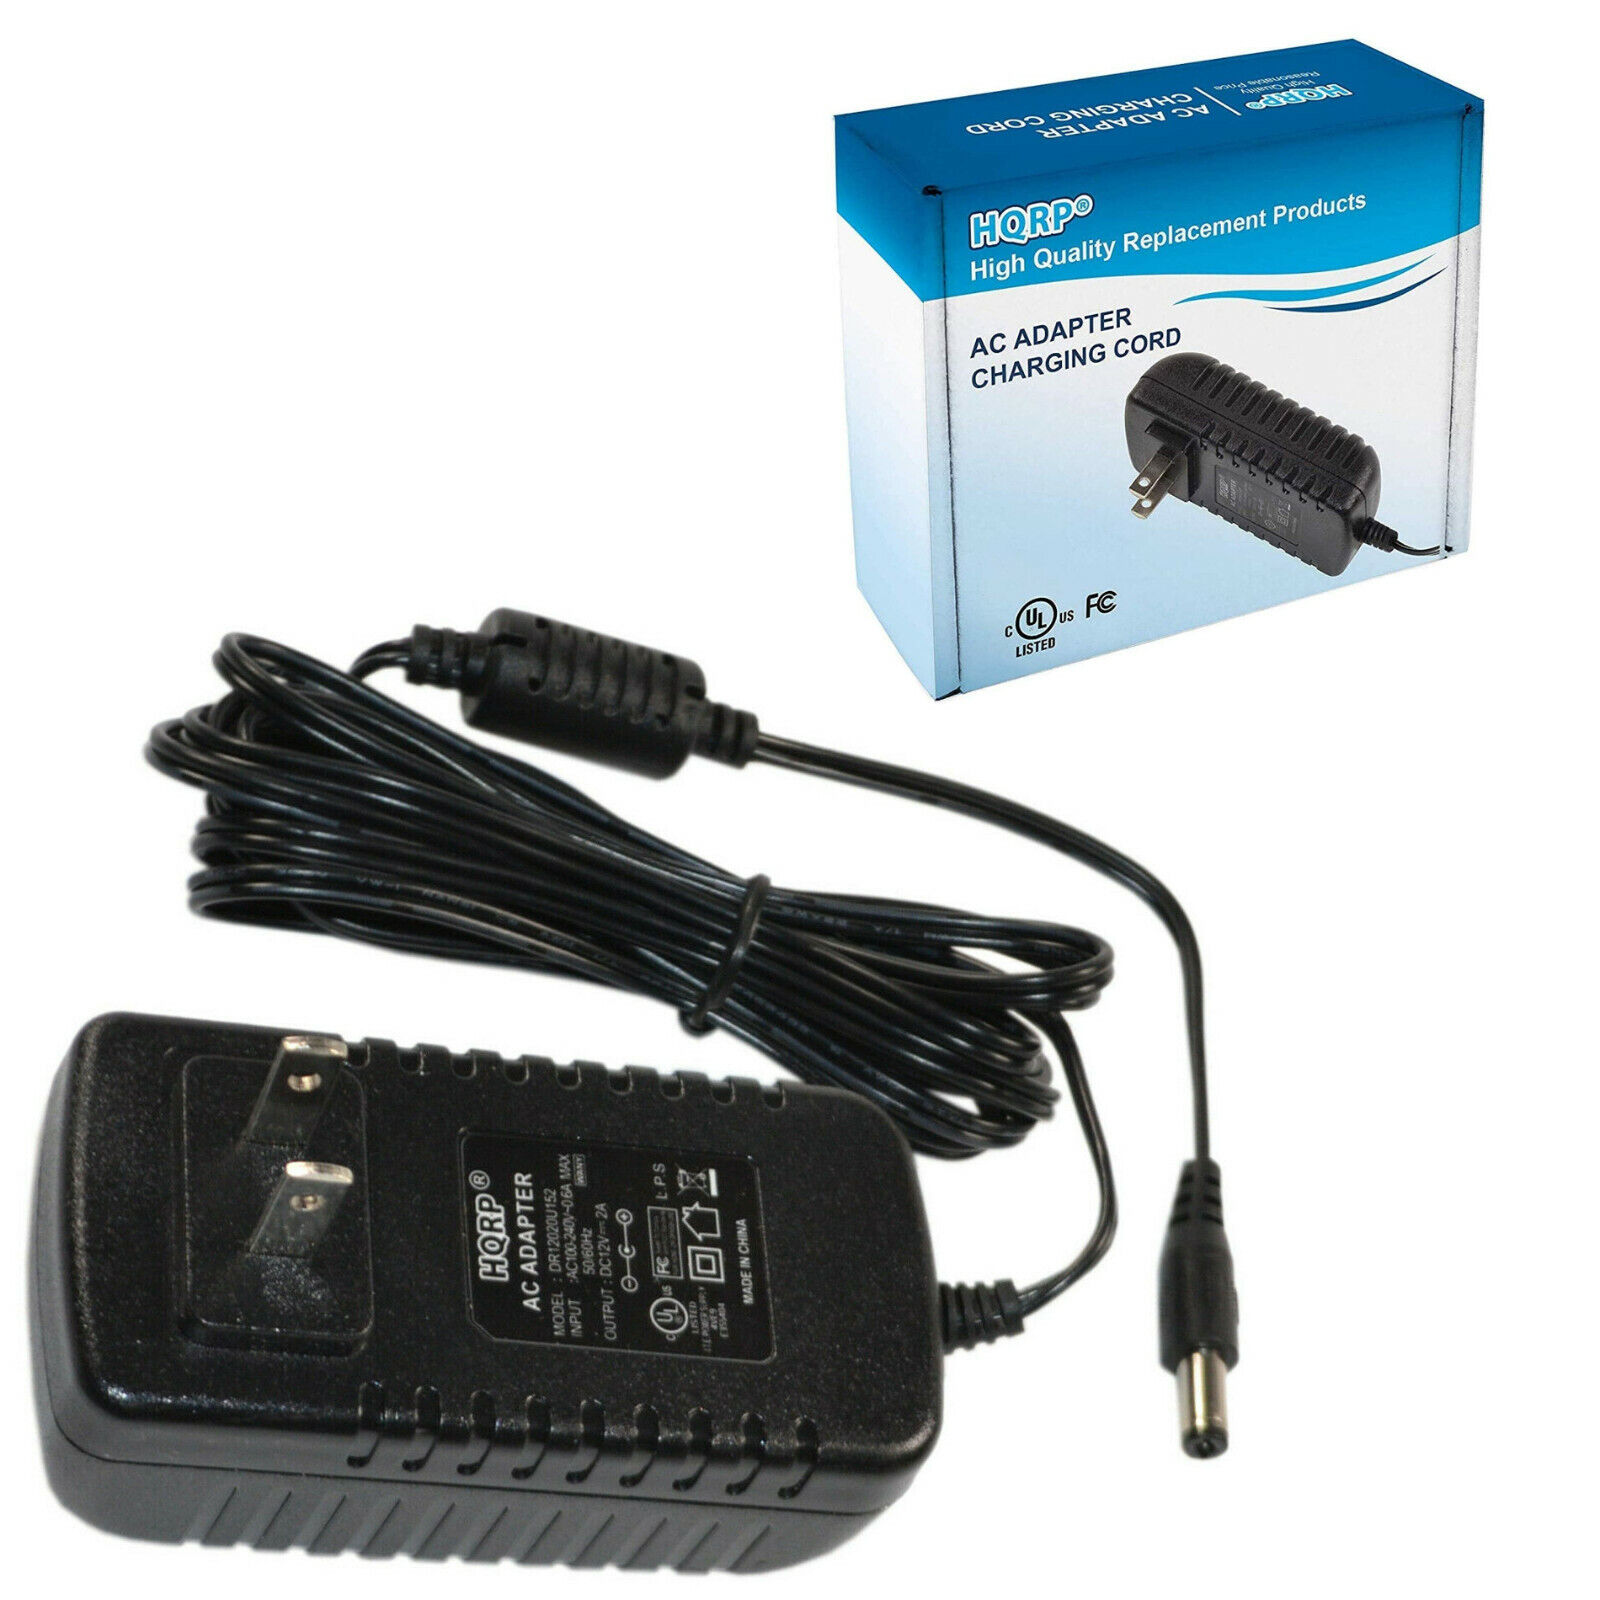 HQRP AC Adapter compatible with Bose Companion 2 Series III Speakers 354495-1100